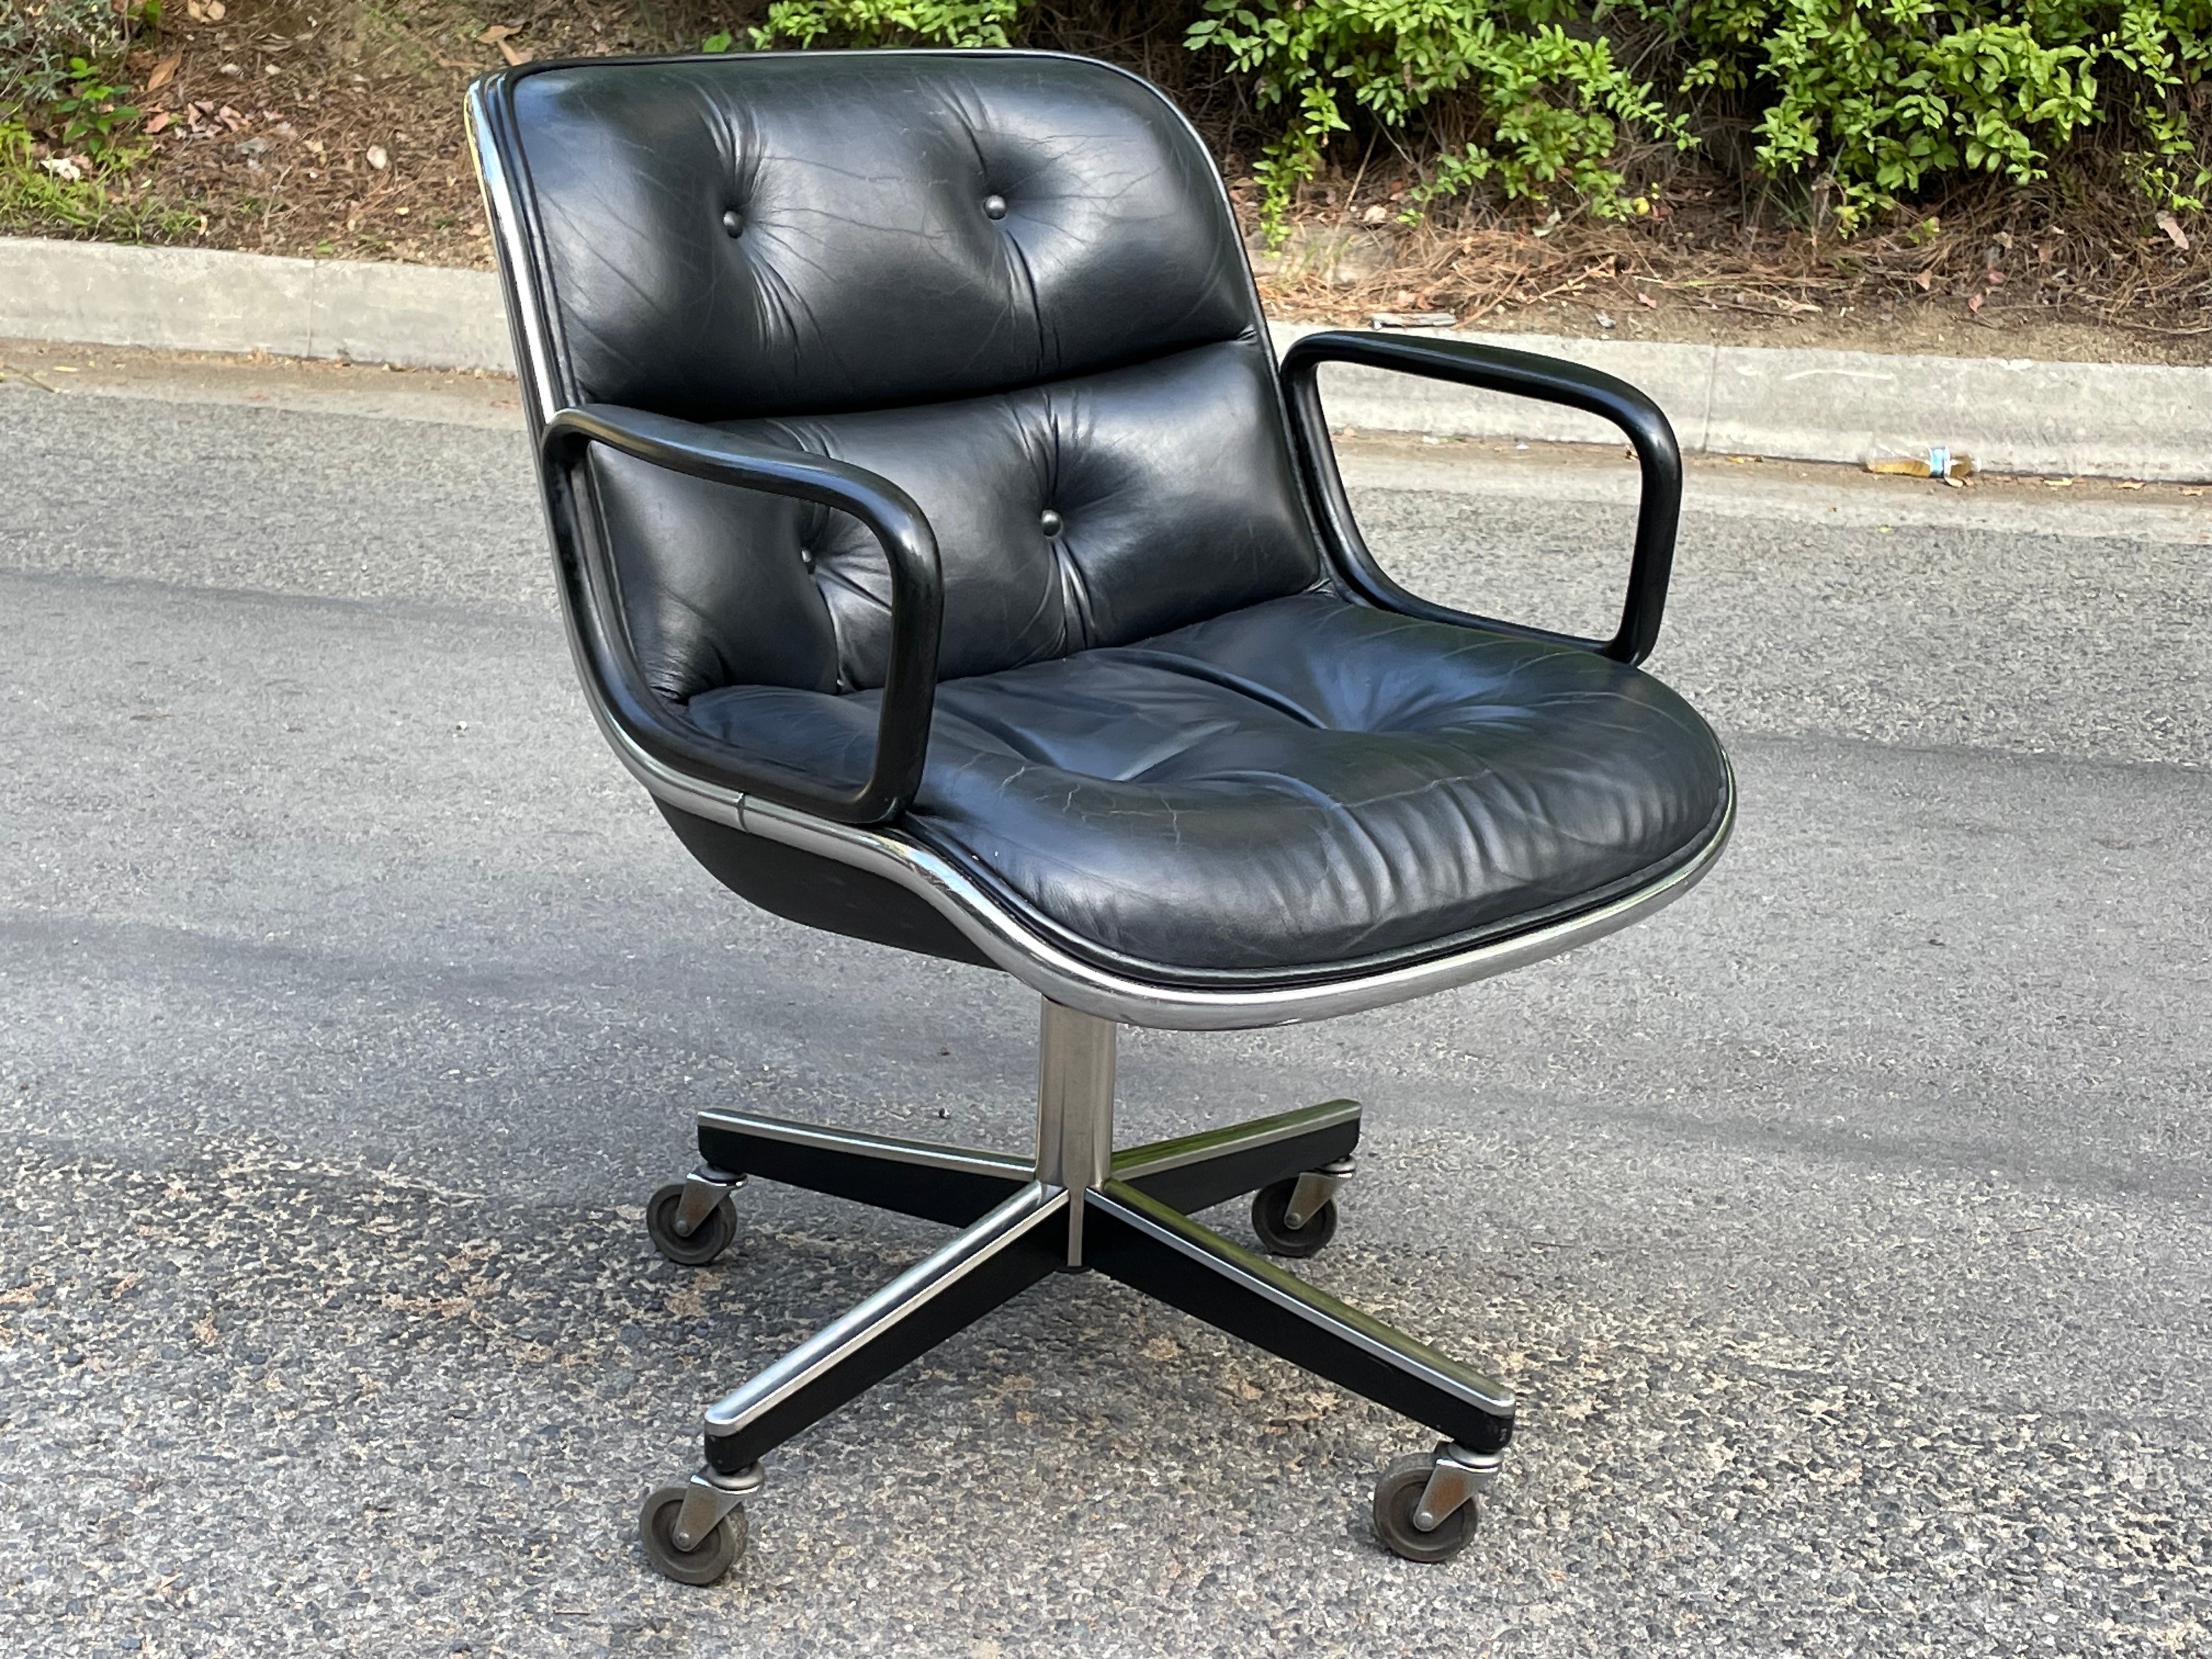 Gorgeous vintage original black leather Pollock desk chair designed by Charles Pollack for Knoll. Features original black leather in very good original condition.

On 4-star chrome pedestal bases. Sourced from Leo Burnett advertising offices. Very